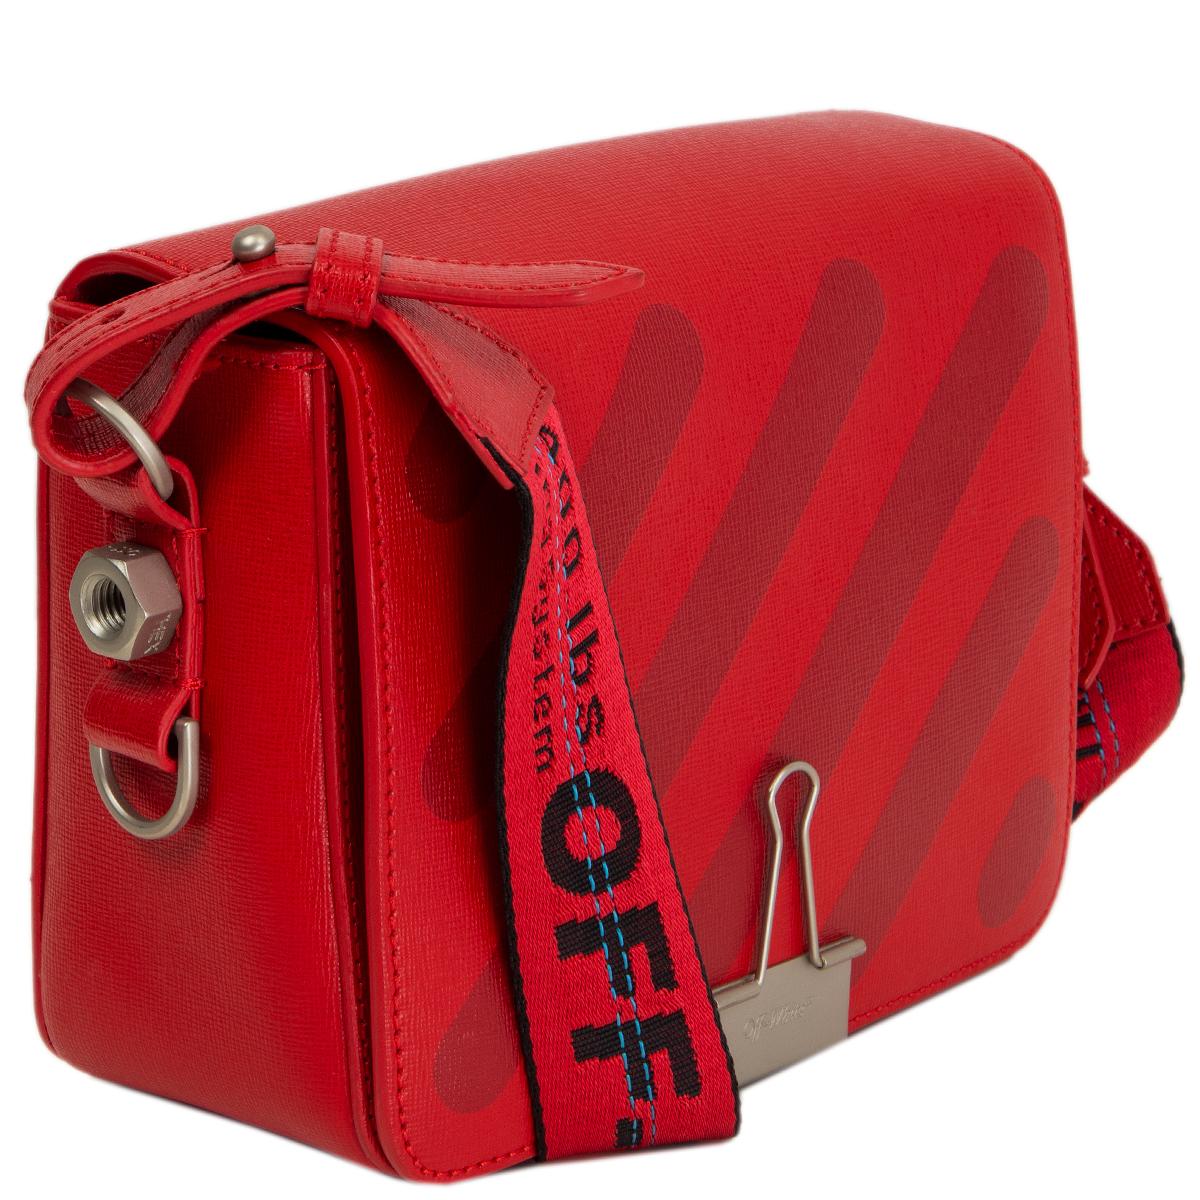 100% authentic Off-White c/o Virgil Abloh Diag Flap Bag in red textured leather accented with a red and black jacquard shoulder strap. Opens with a magnetic button and is lined in black grosgrain fabric with one zip pocket against the back and one